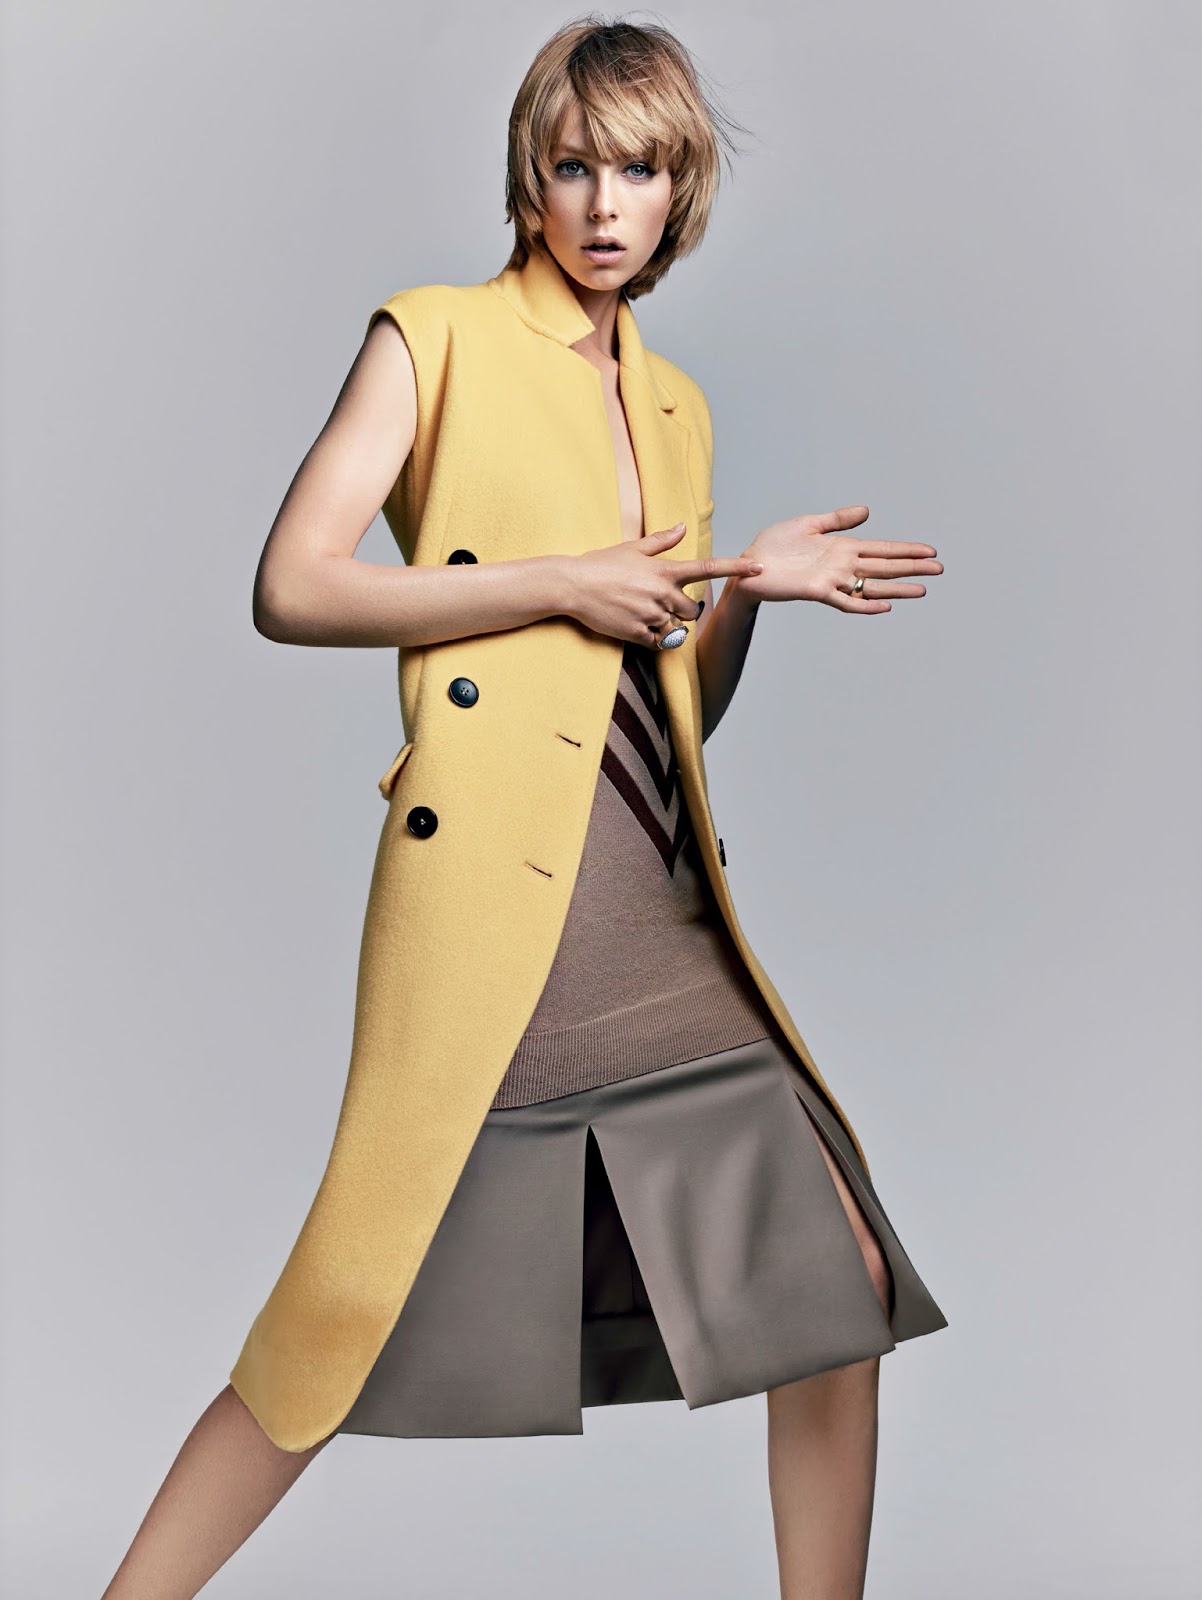 city swagger: edie campbell by craig mcdean for vogue september 2014 ...